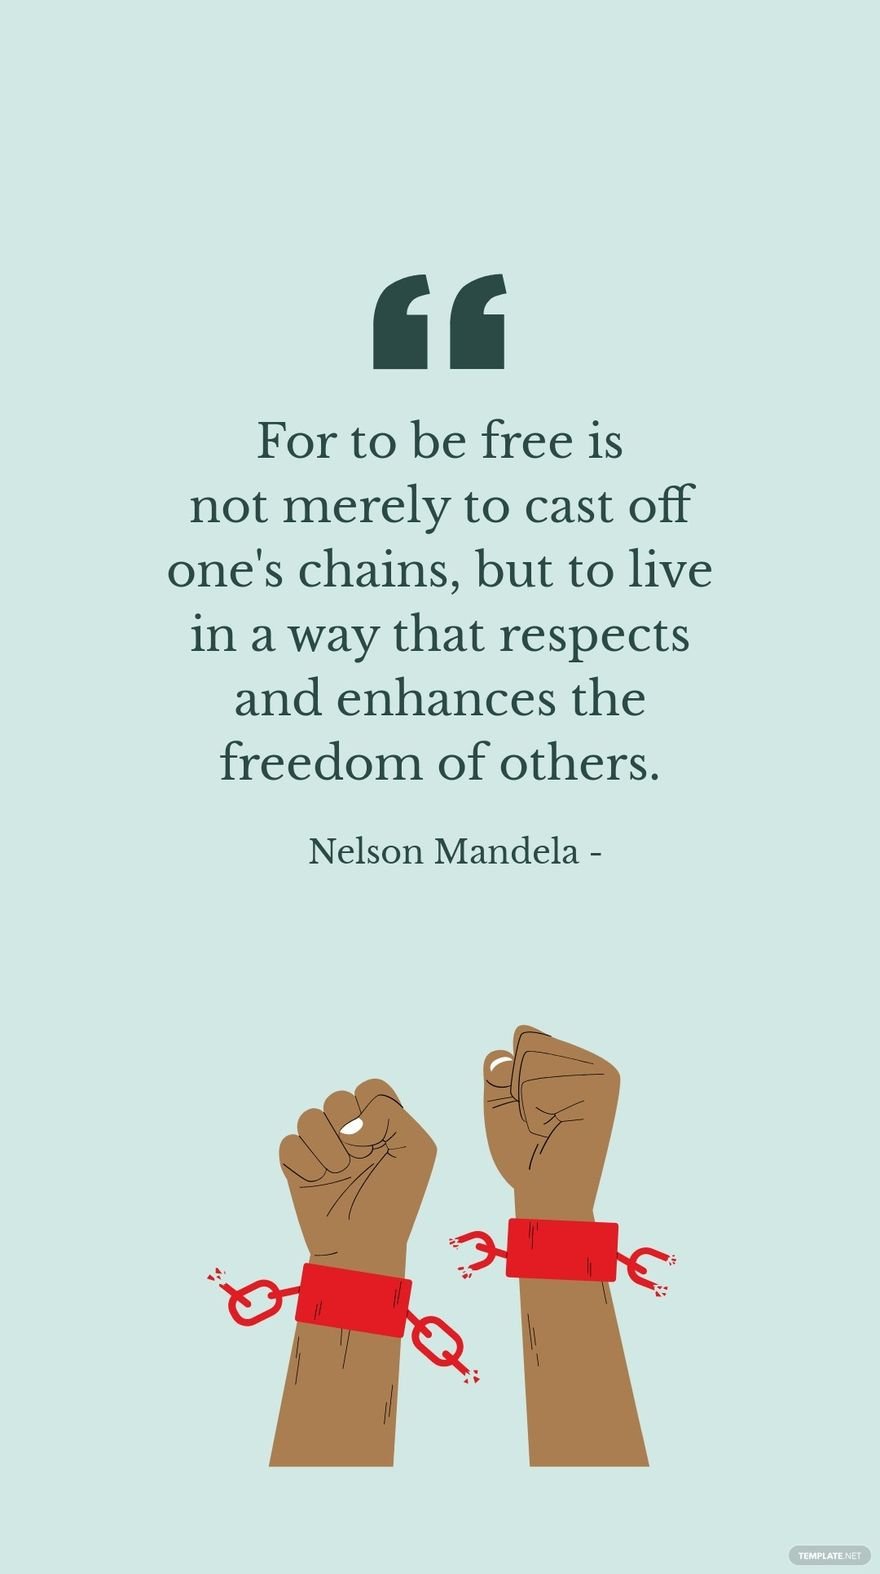 Nelson Mandela - For to be is not merely to cast off one's chains, but to live in a way that respects and enhances the freedom of others. in JPG